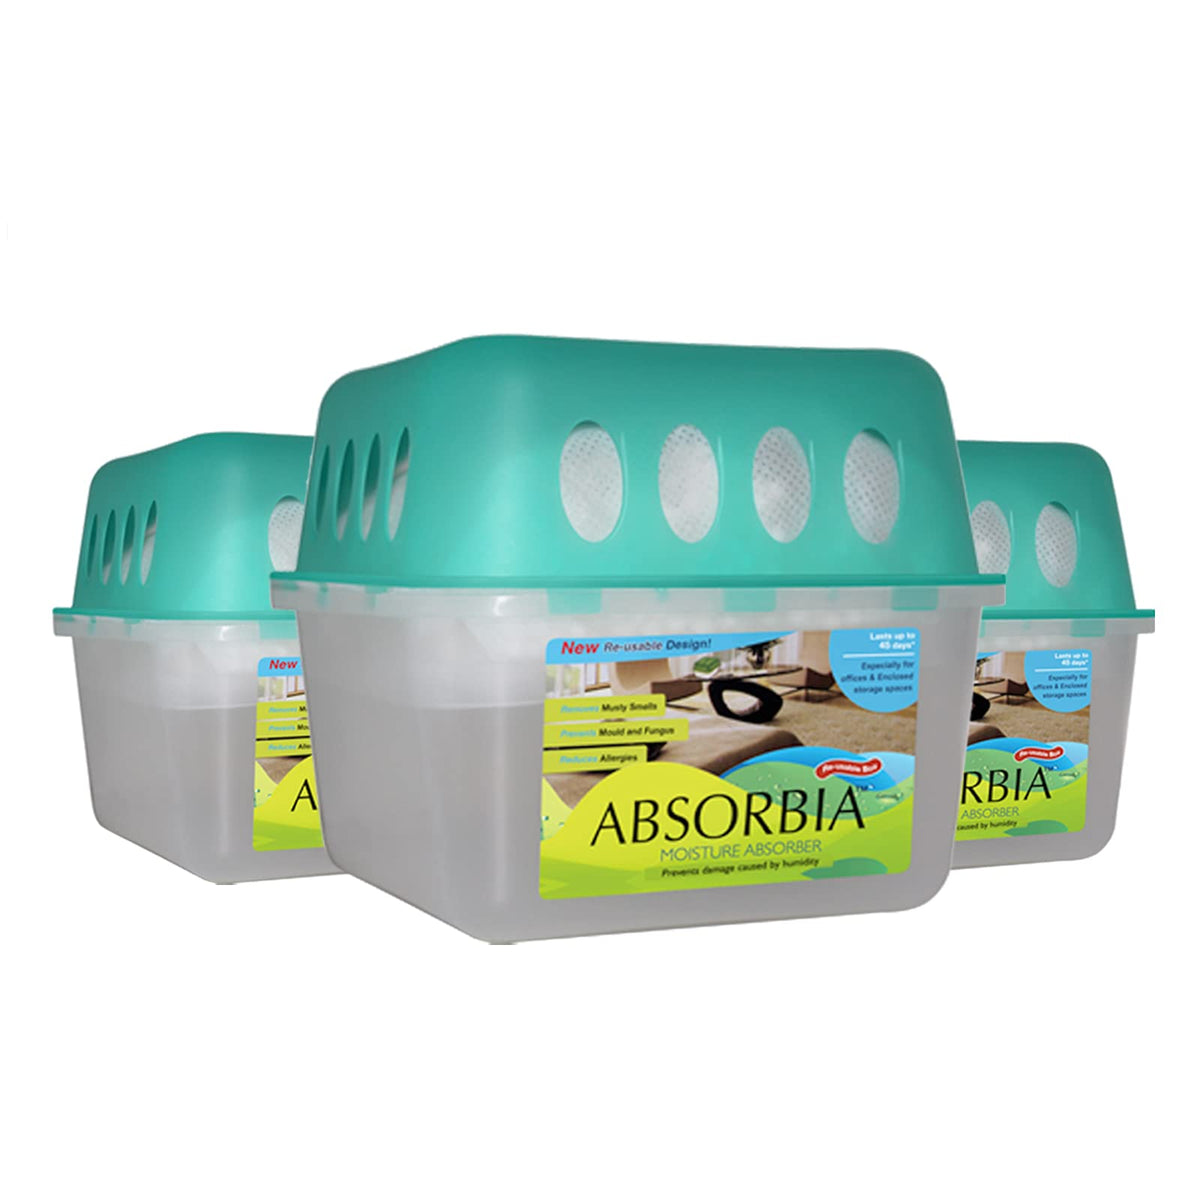 Absorbia Moisture Absorber|Absorbia Reusable Box w/Refill-Pack of 3 (400 g  X 3 Boxes)|Absorbs 800ml| Dehumidifier for Basement, Storerooms, Spare